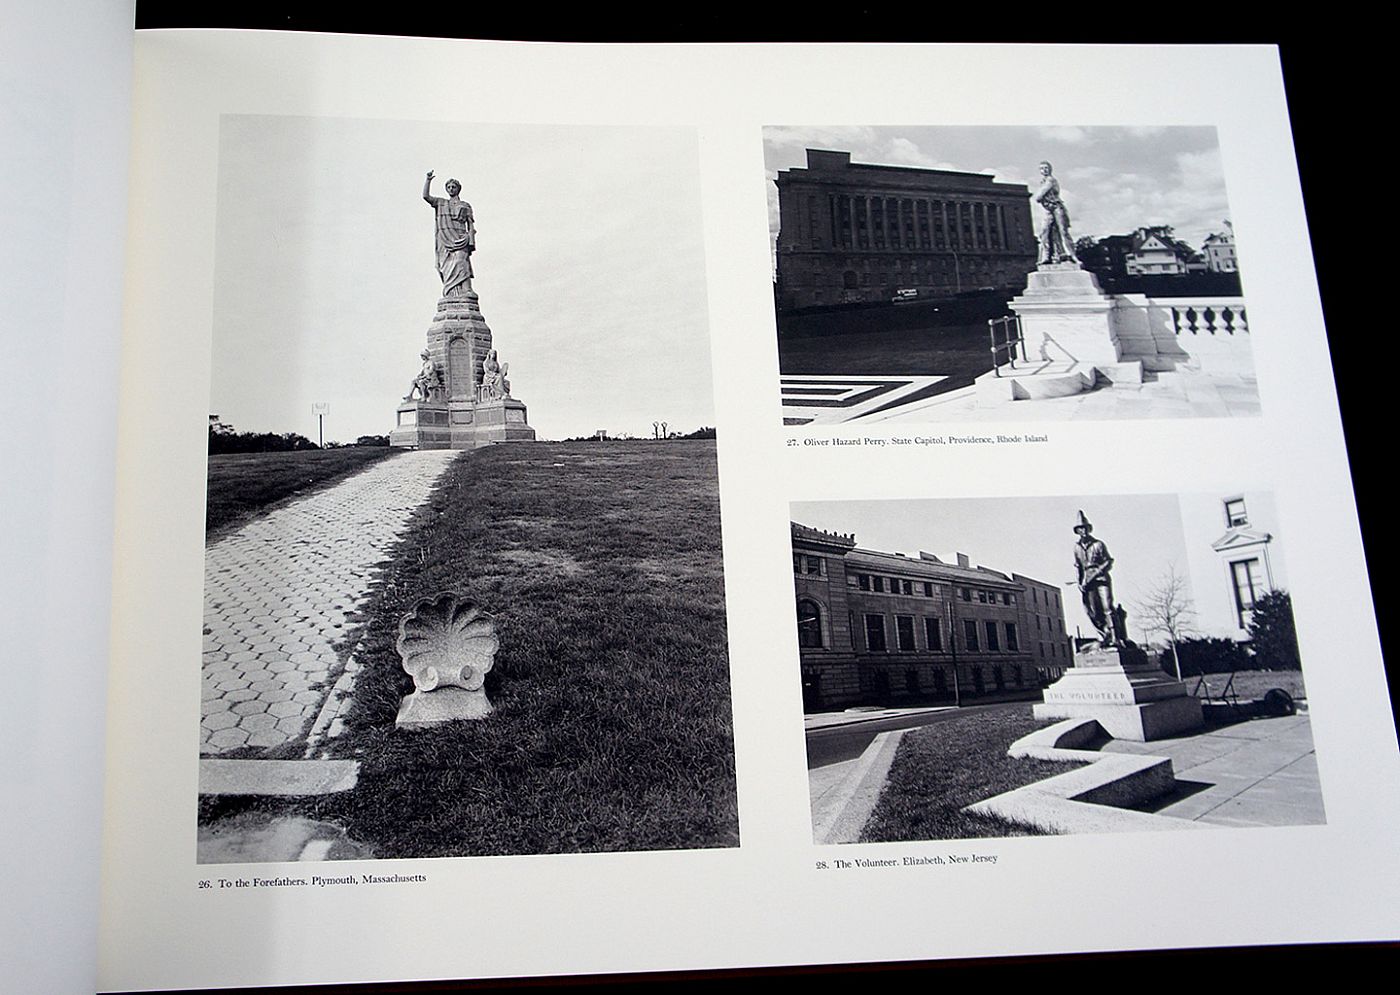 Lee Friedlander: The American Monument (Special Limited Edition with One Vintage Gelatin Silver Print)